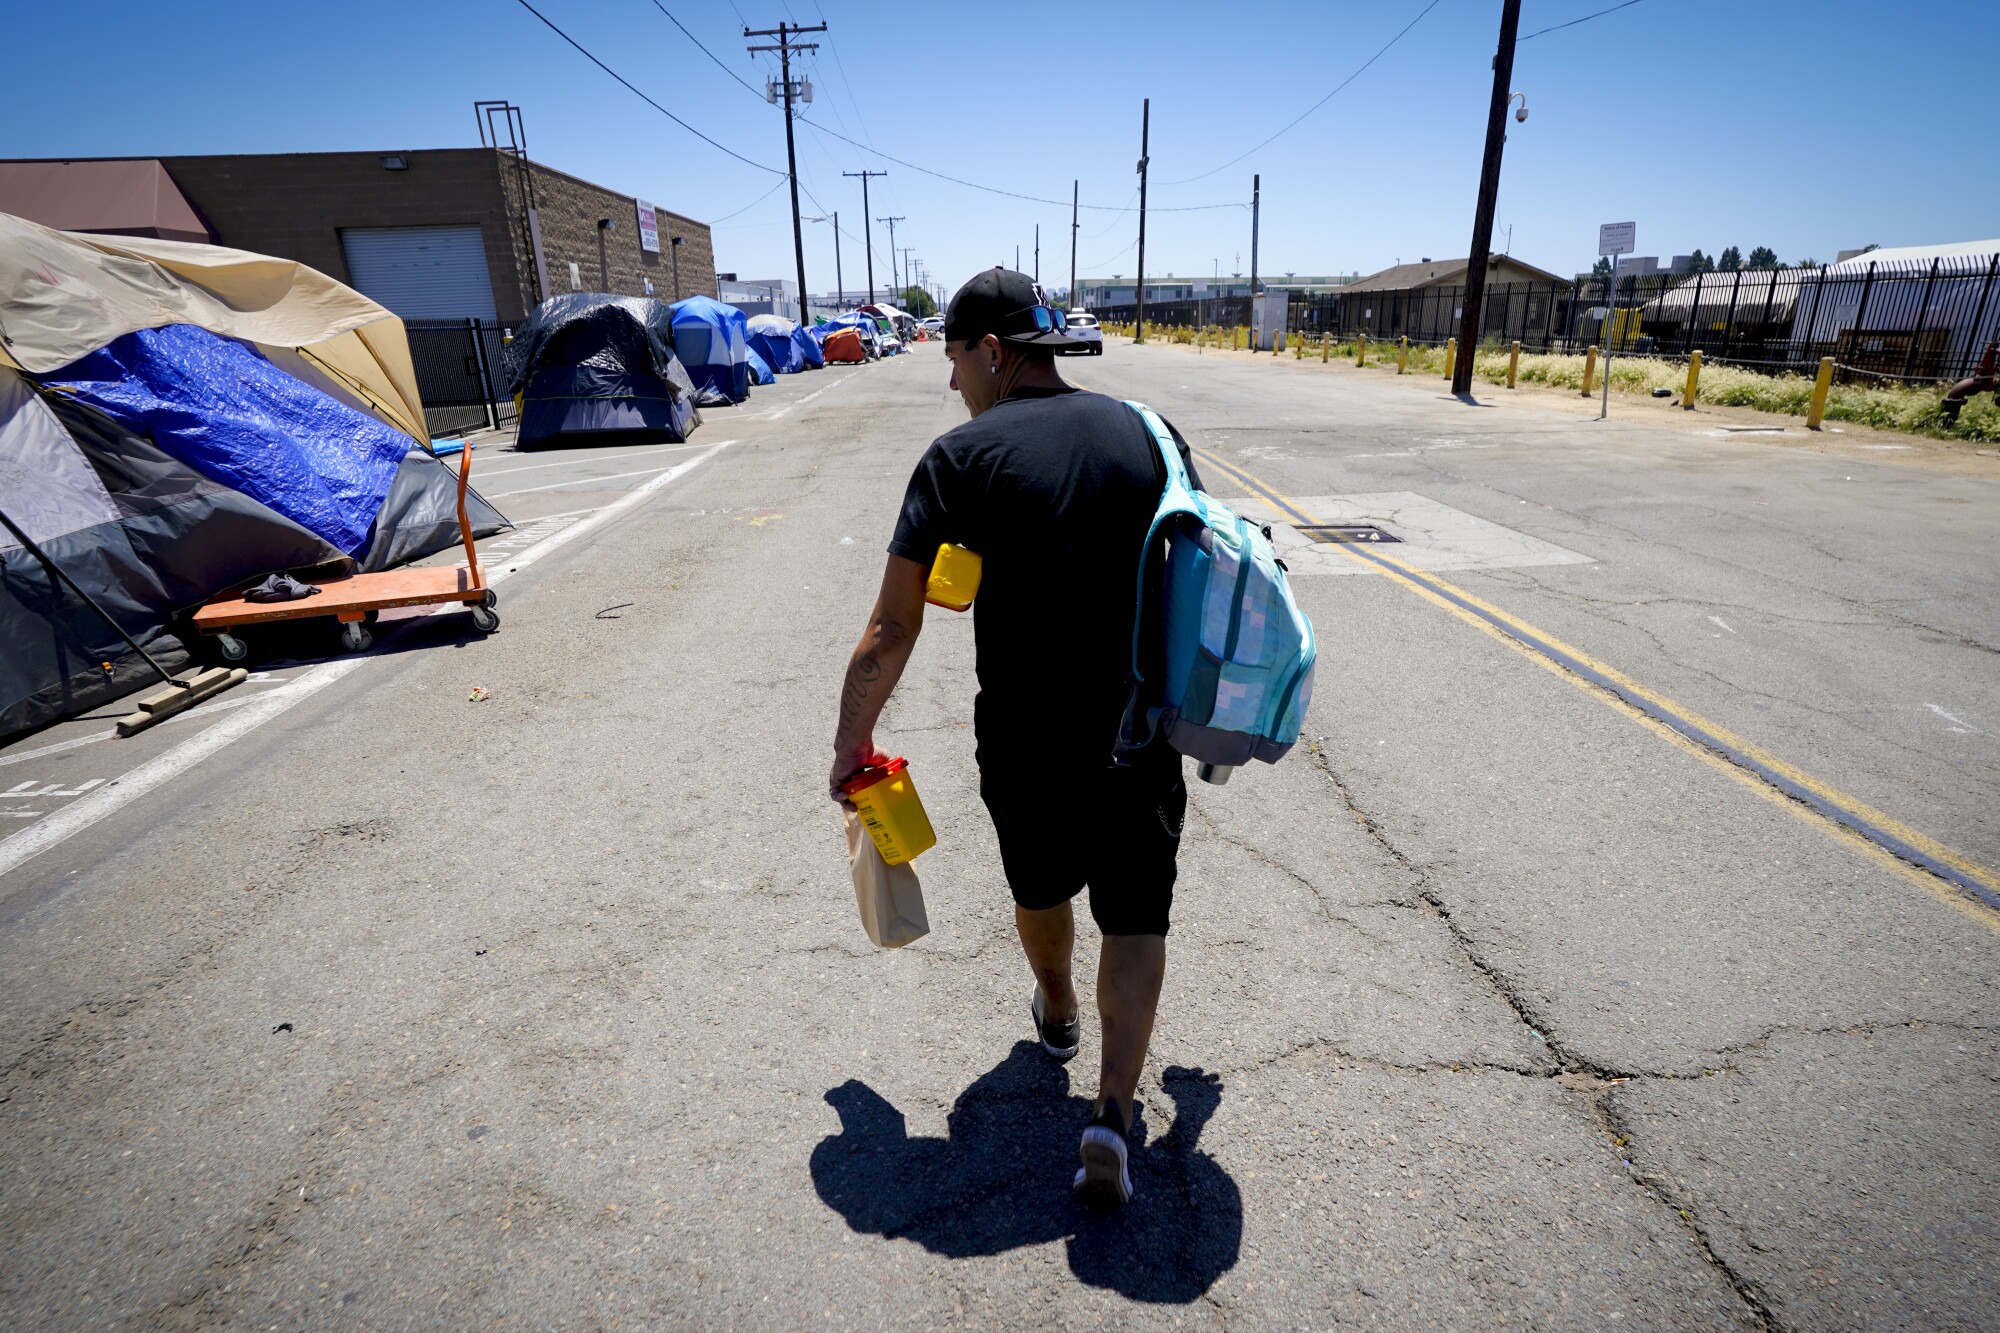 Billy walks past several tents at a homeless encampment